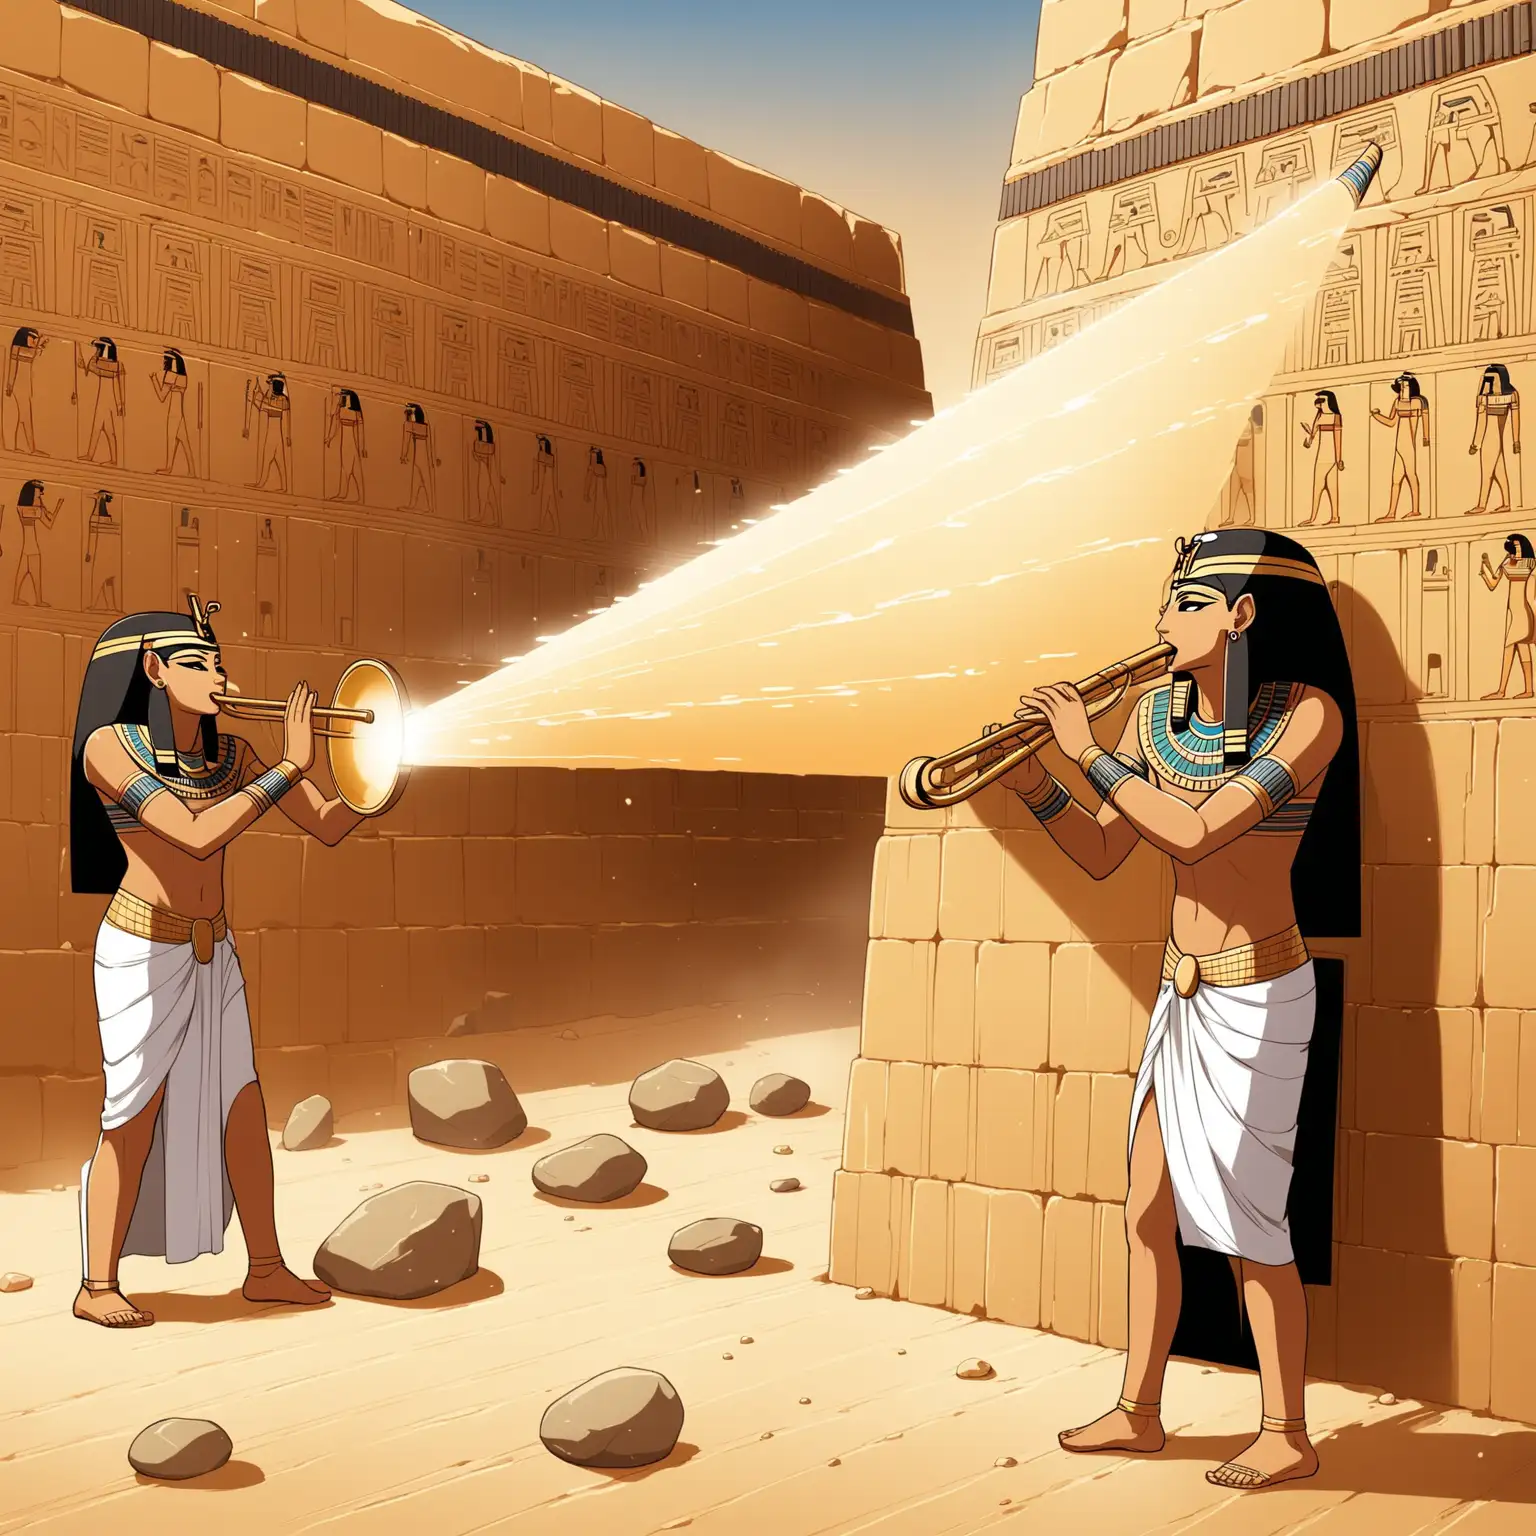 The Egyptians blowing through an ancient instrument which produces sound waves which are carrying perfectly cut stones 